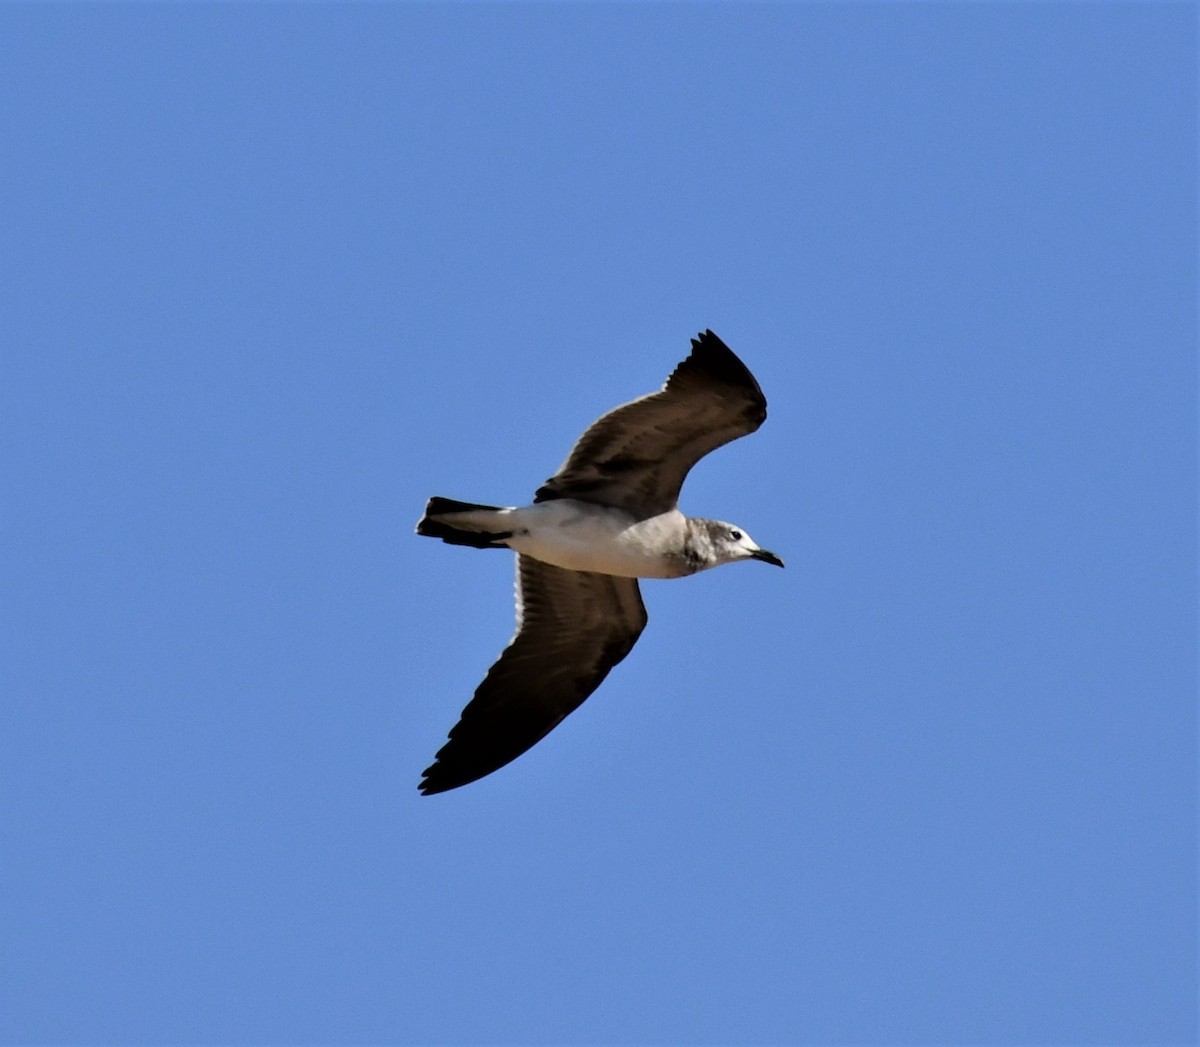 Laughing Gull - Pam Vercellone-Smith